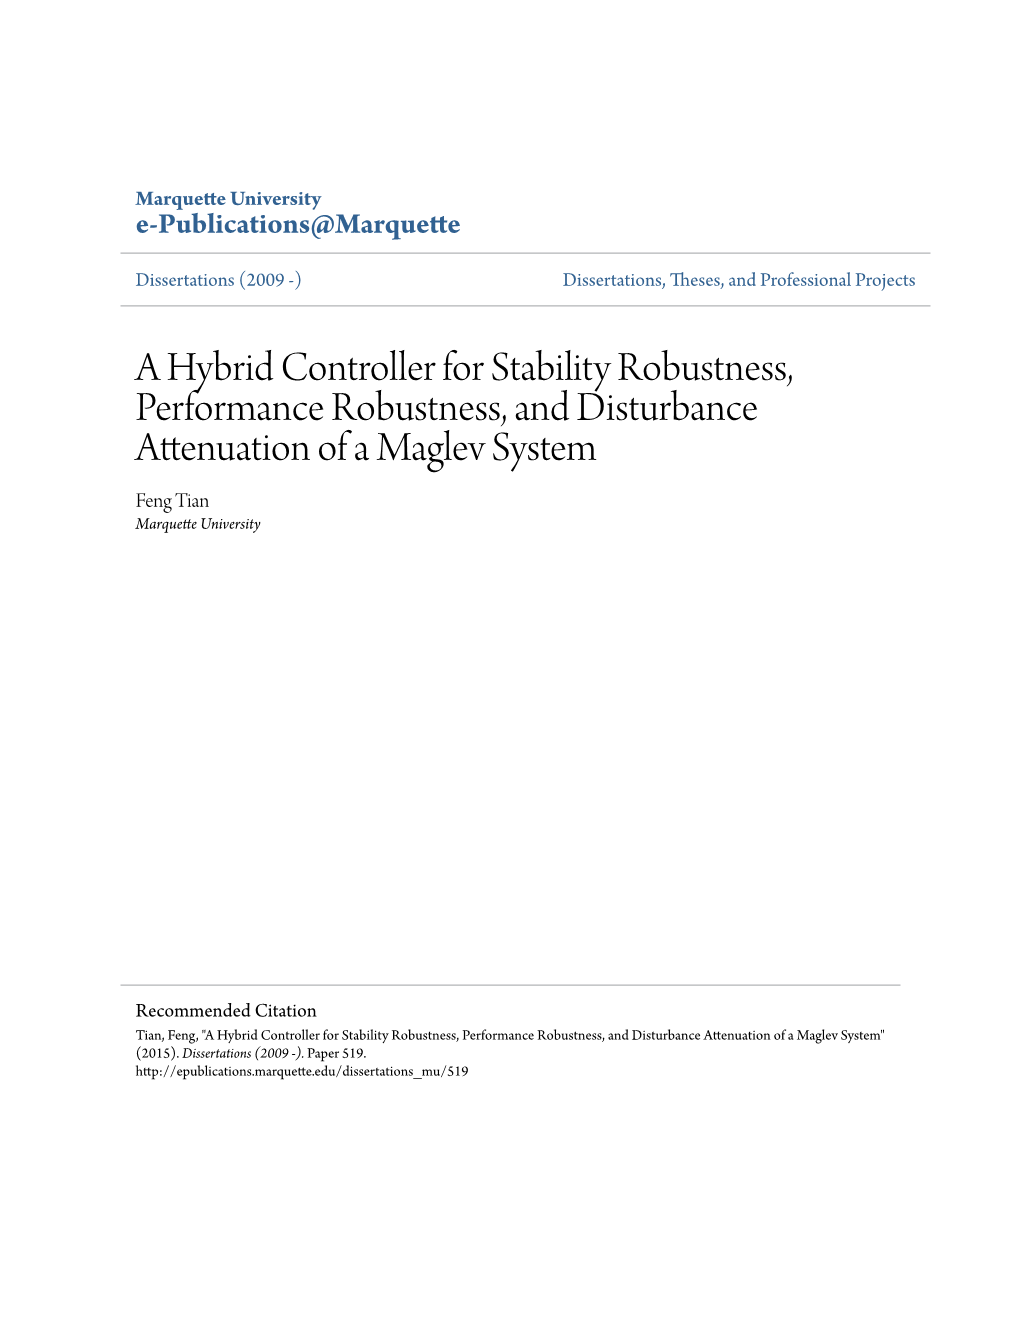 A Hybrid Controller for Stability Robustness, Performance Robustness, and Disturbance Attenuation of a Maglev System Feng Tian Marquette University